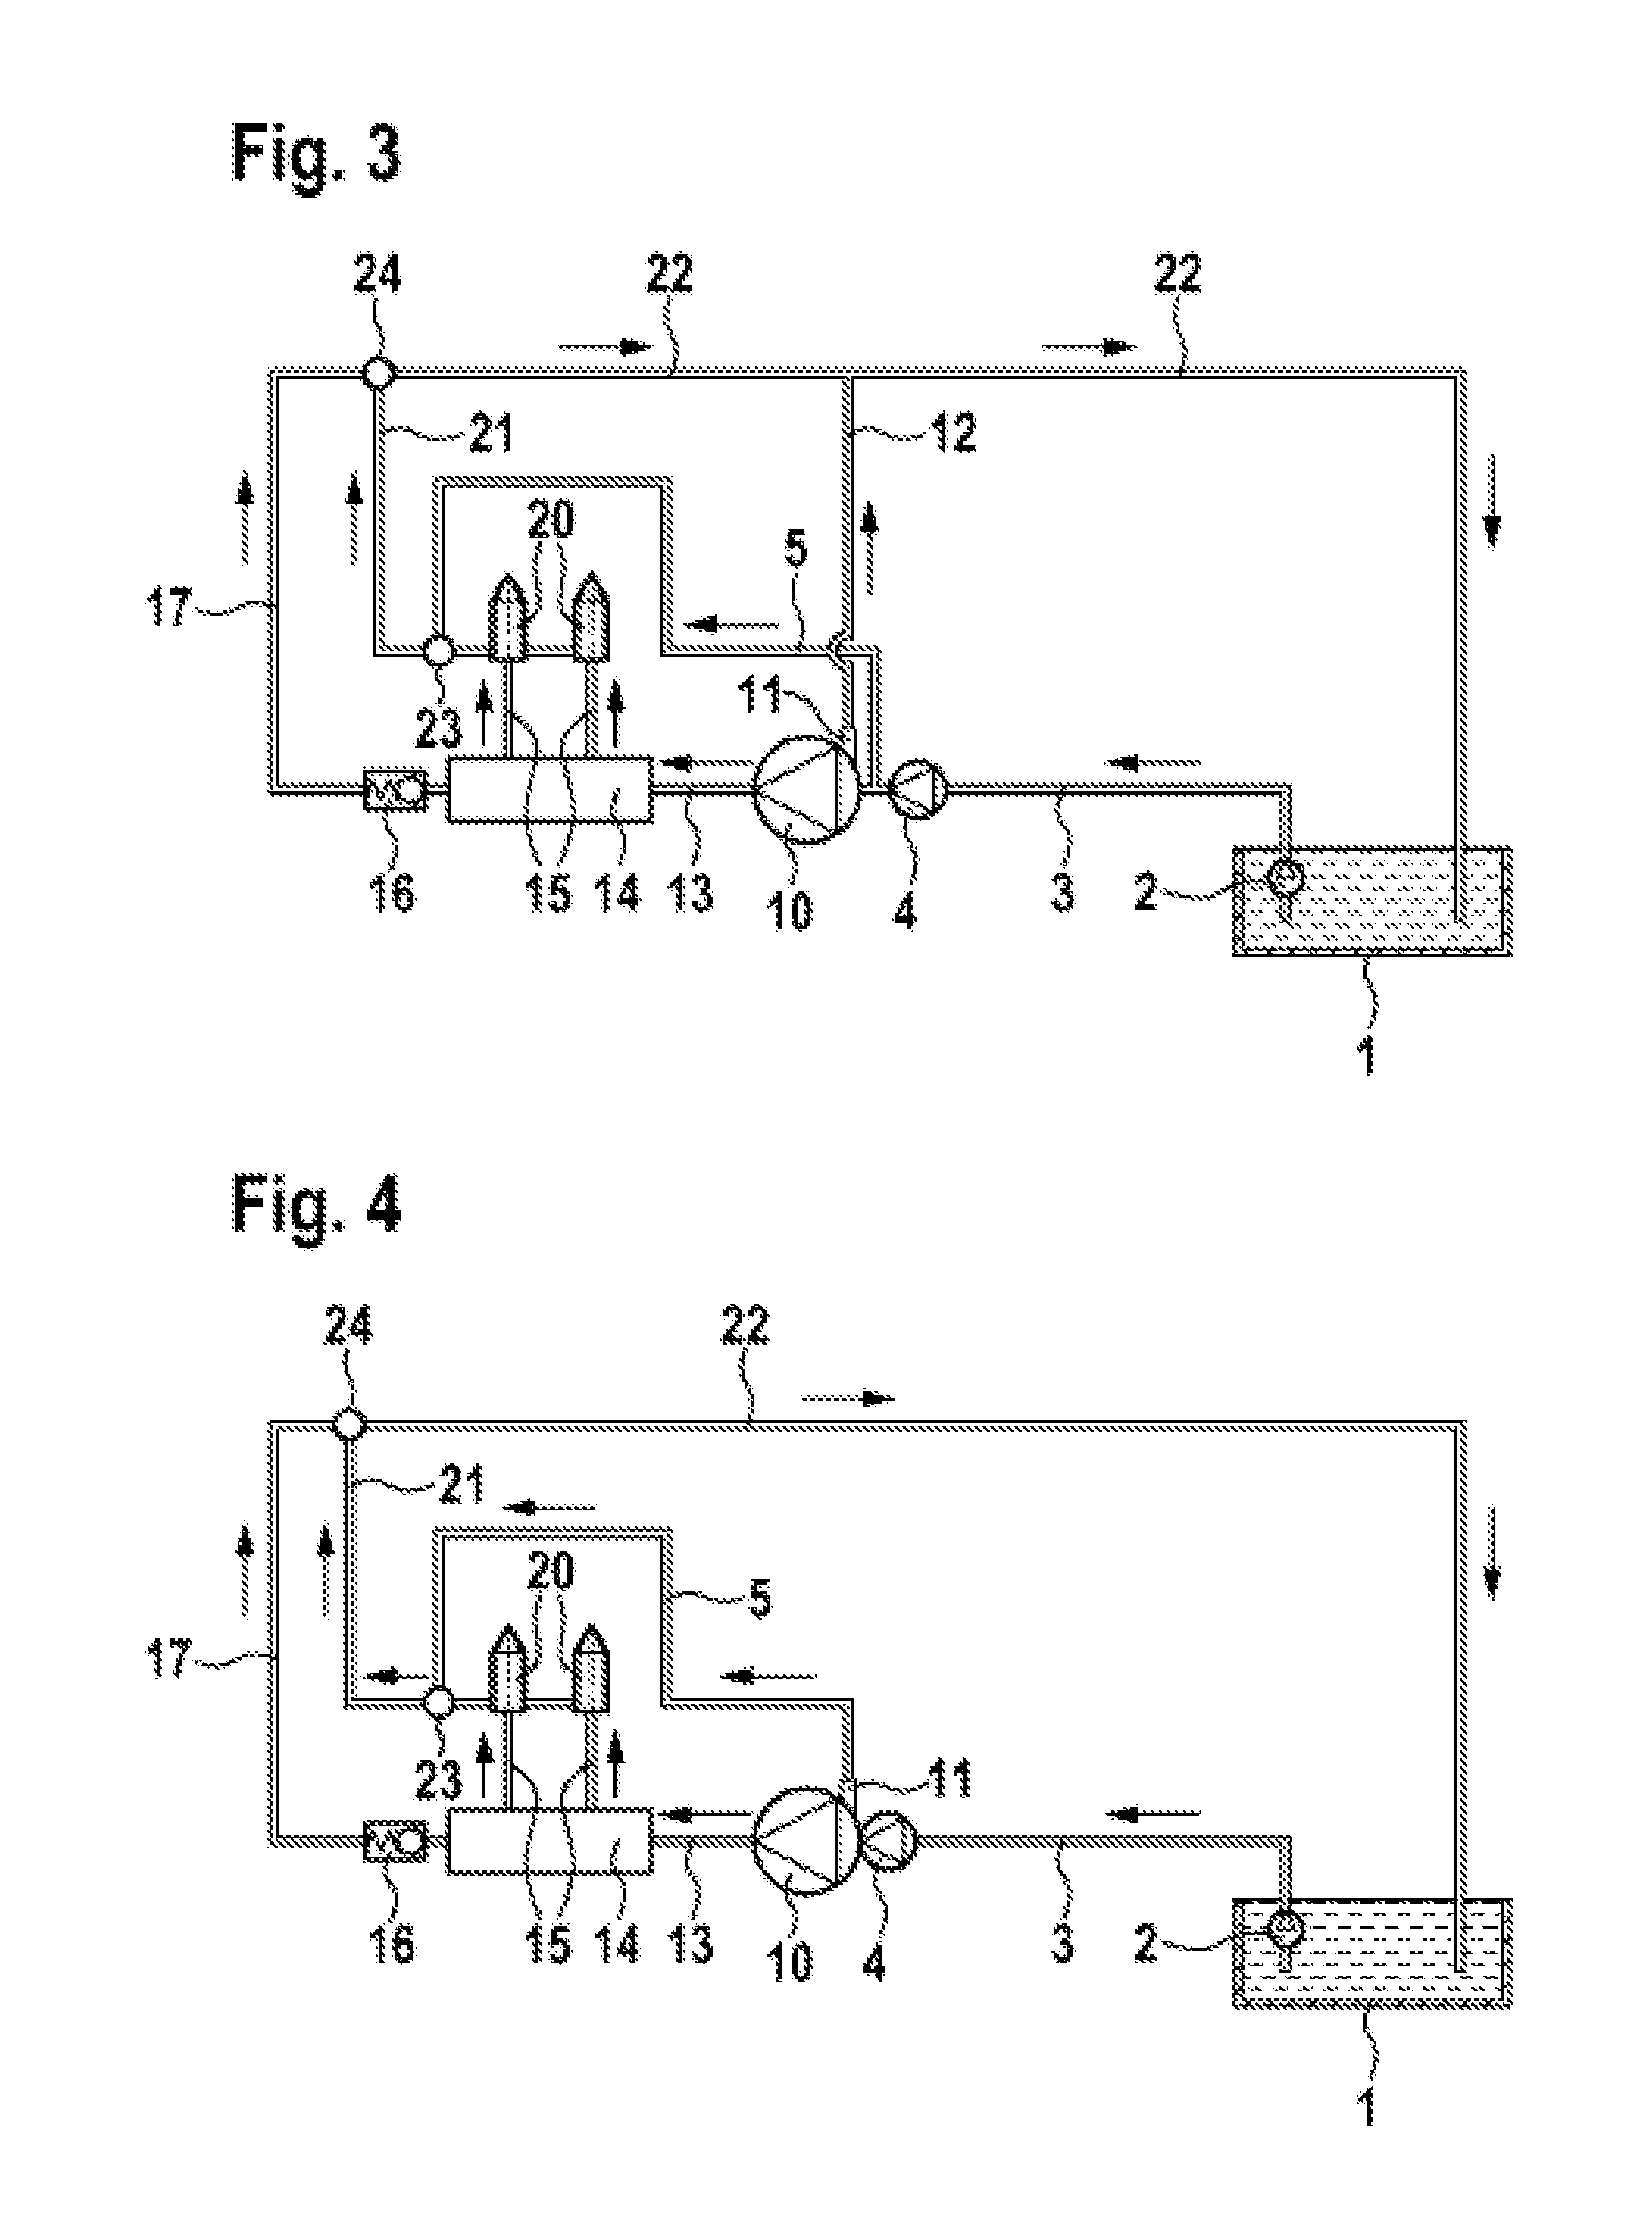 High pressure injection system having fuel cooling from low pressure region